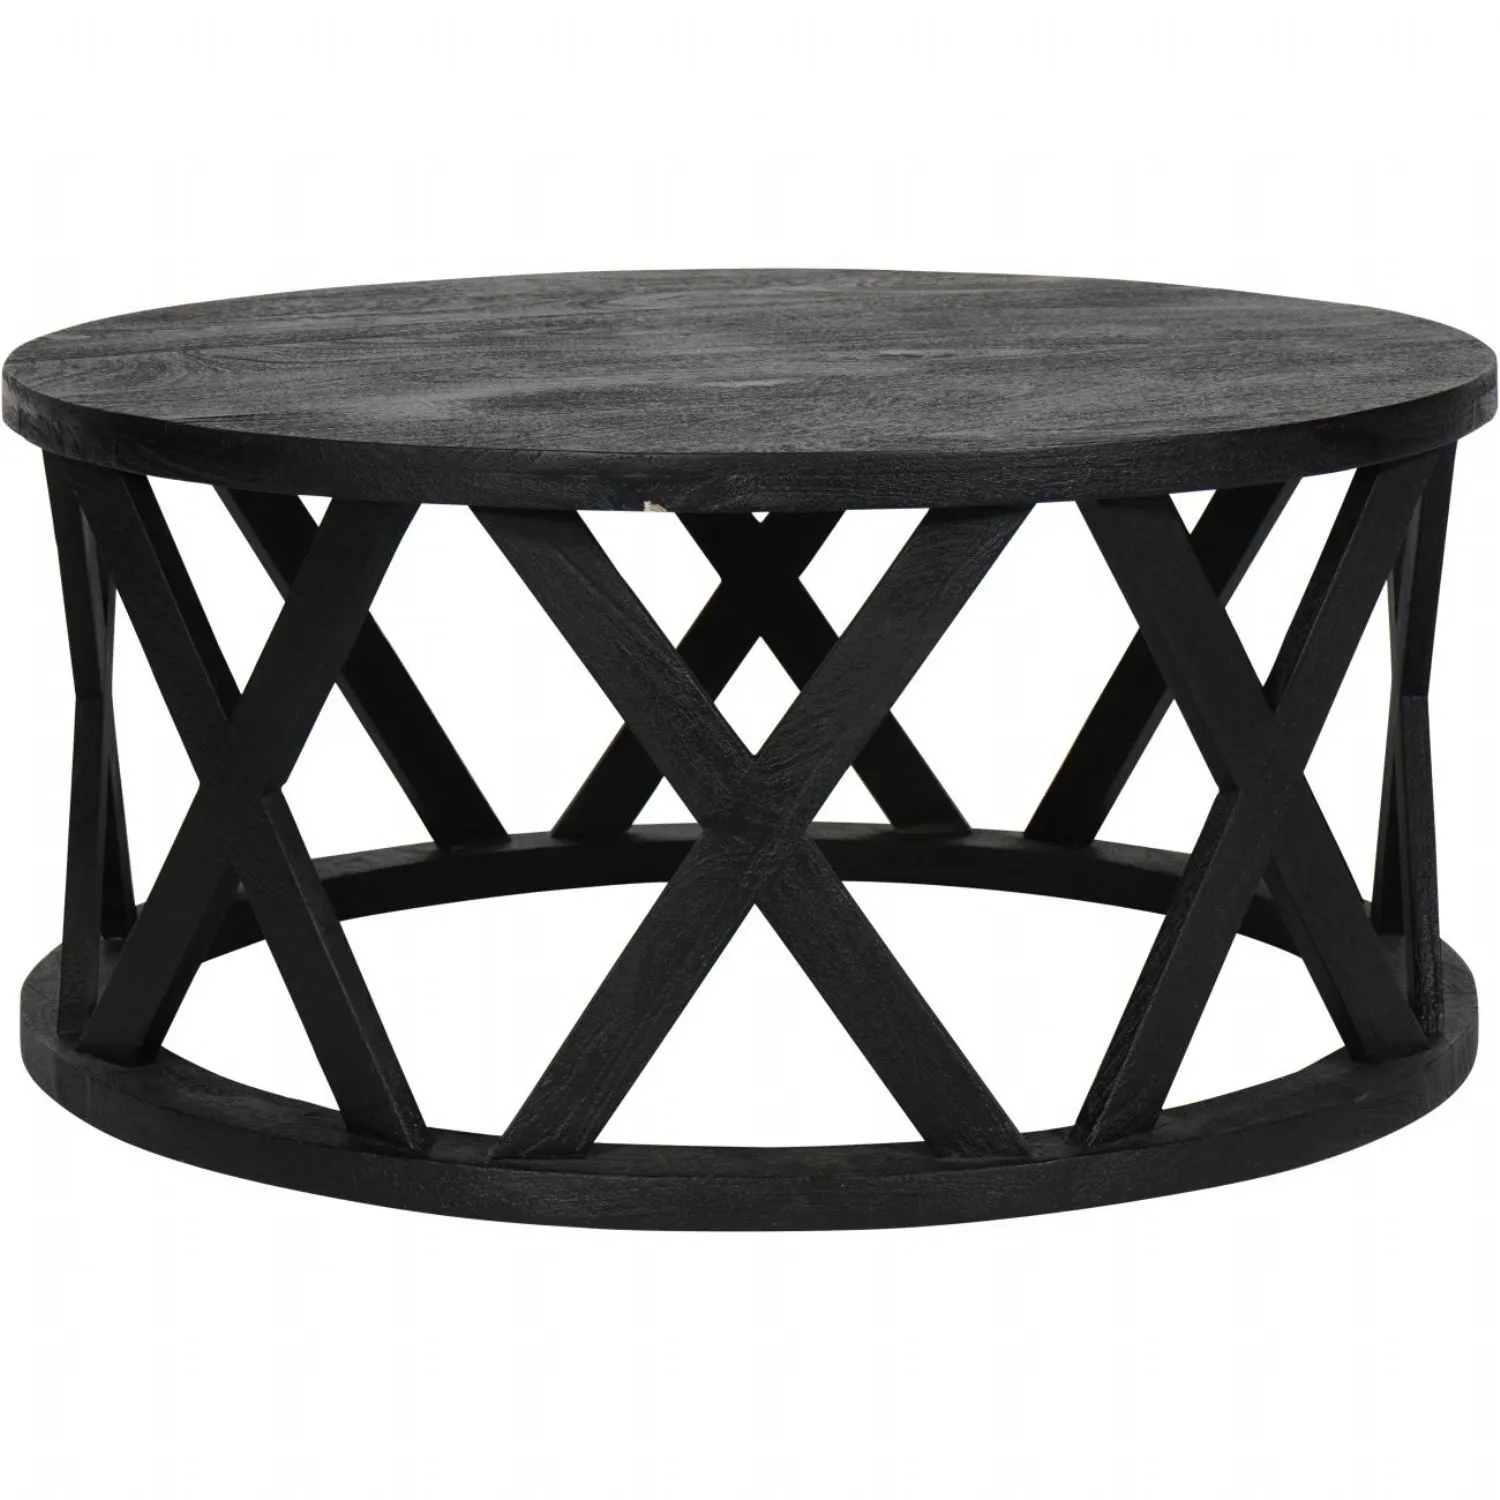 Black Solid Wood Criss Cross Round Coffee Table